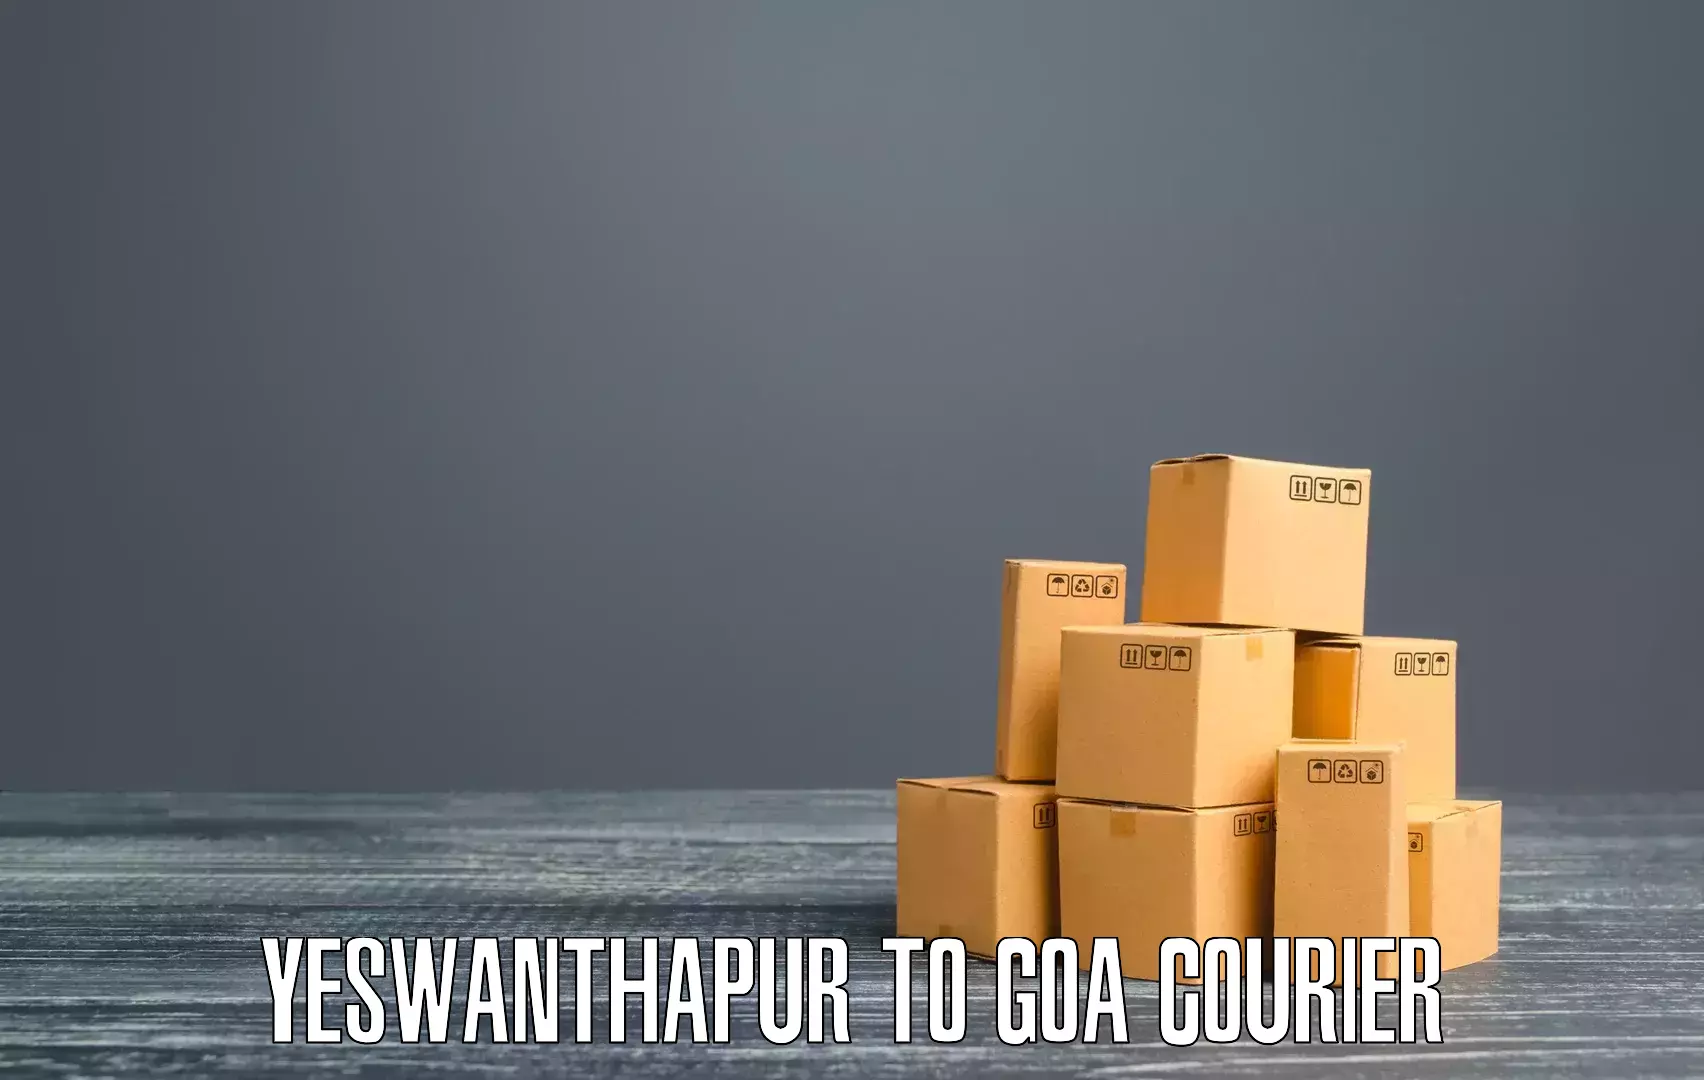 Comprehensive logistics Yeswanthapur to South Goa